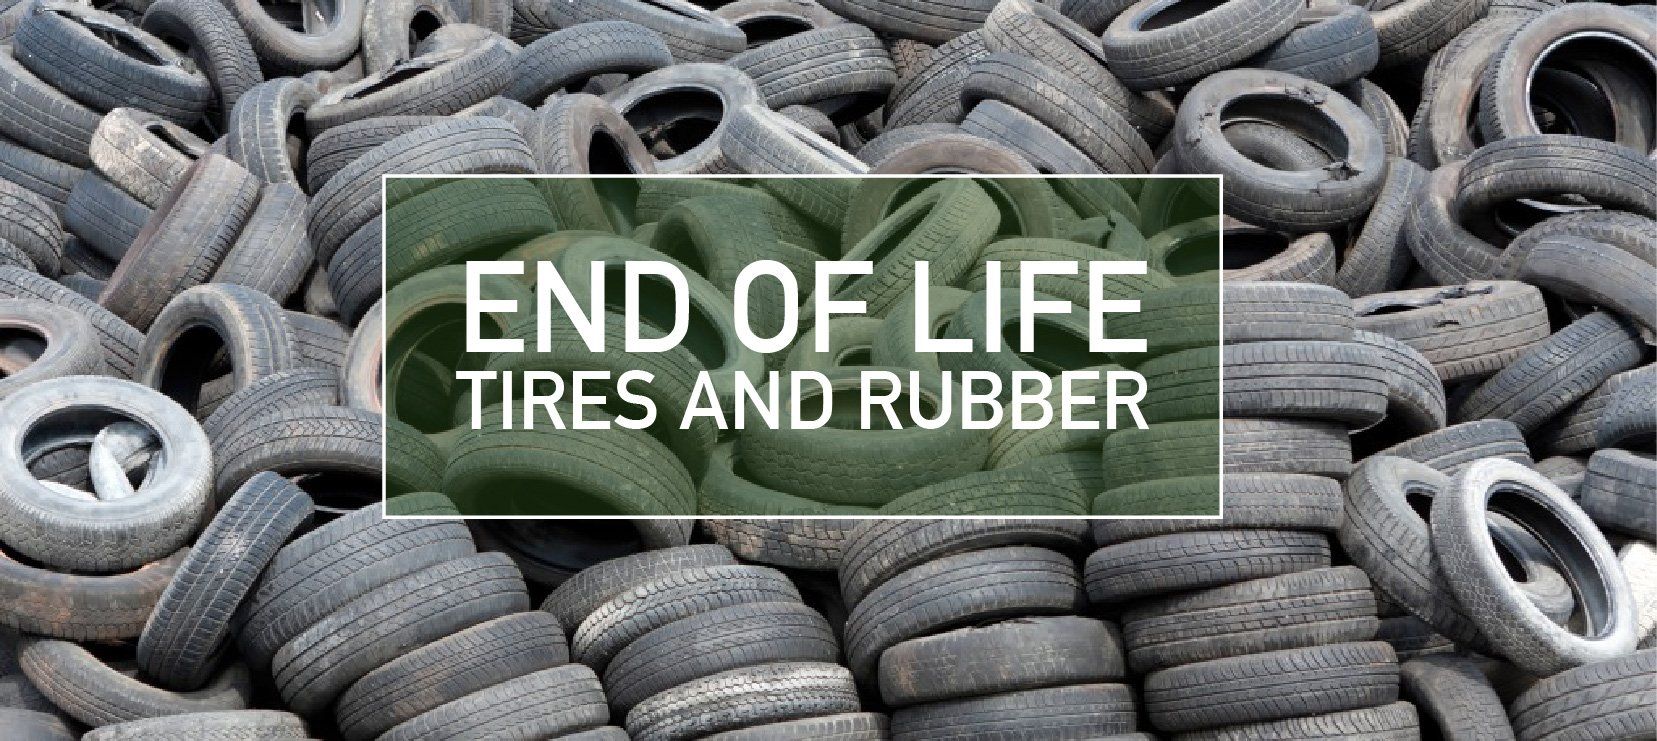 Tire & rubber - pyrolysis applications